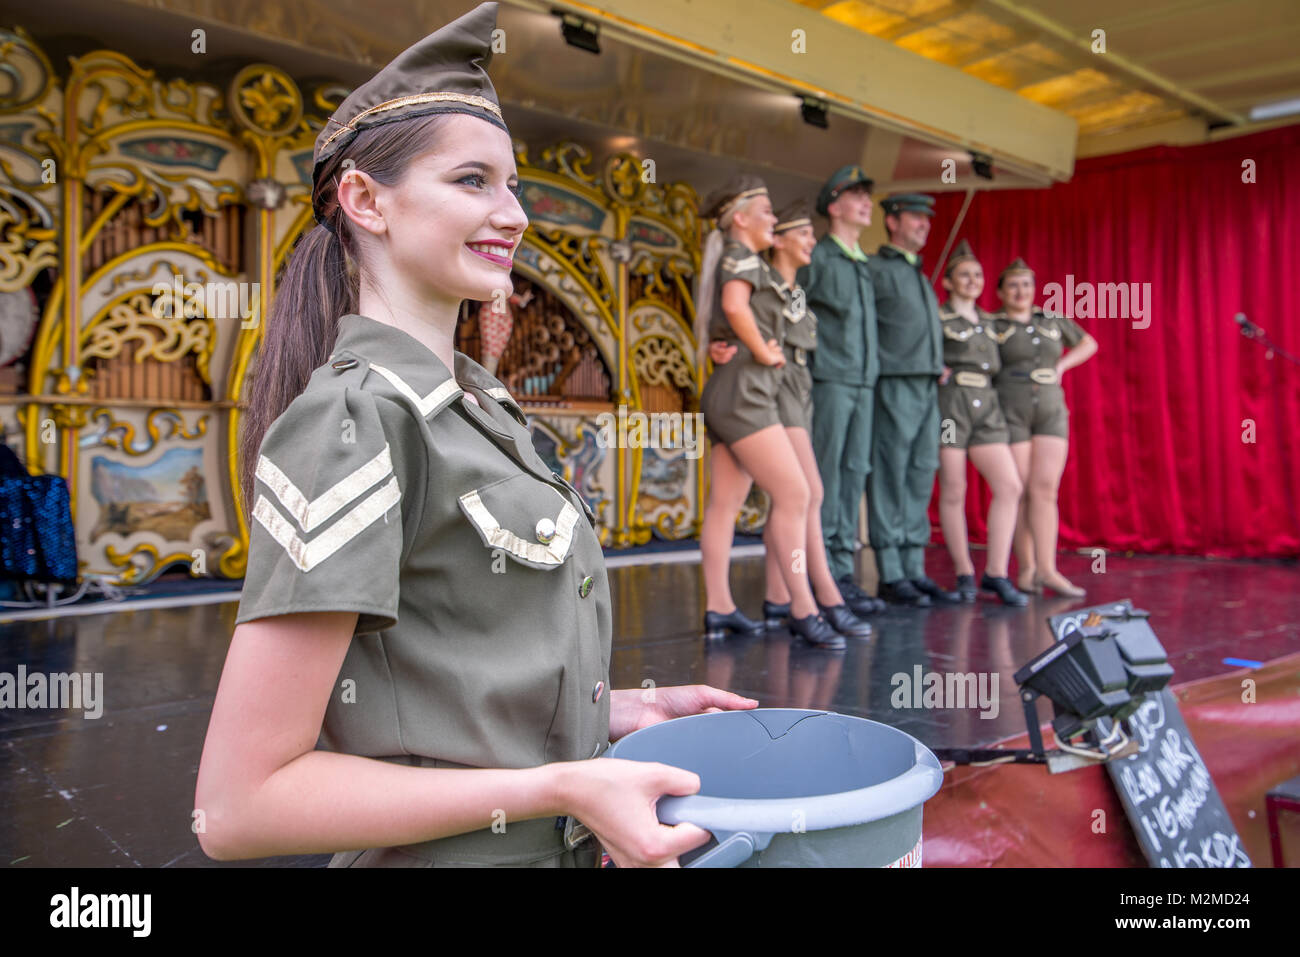 Close up of female dancer in military outfit holding collection bucket while her fellow dancers stand on top of fairground organ, Masham, North Yorksh Stock Photo